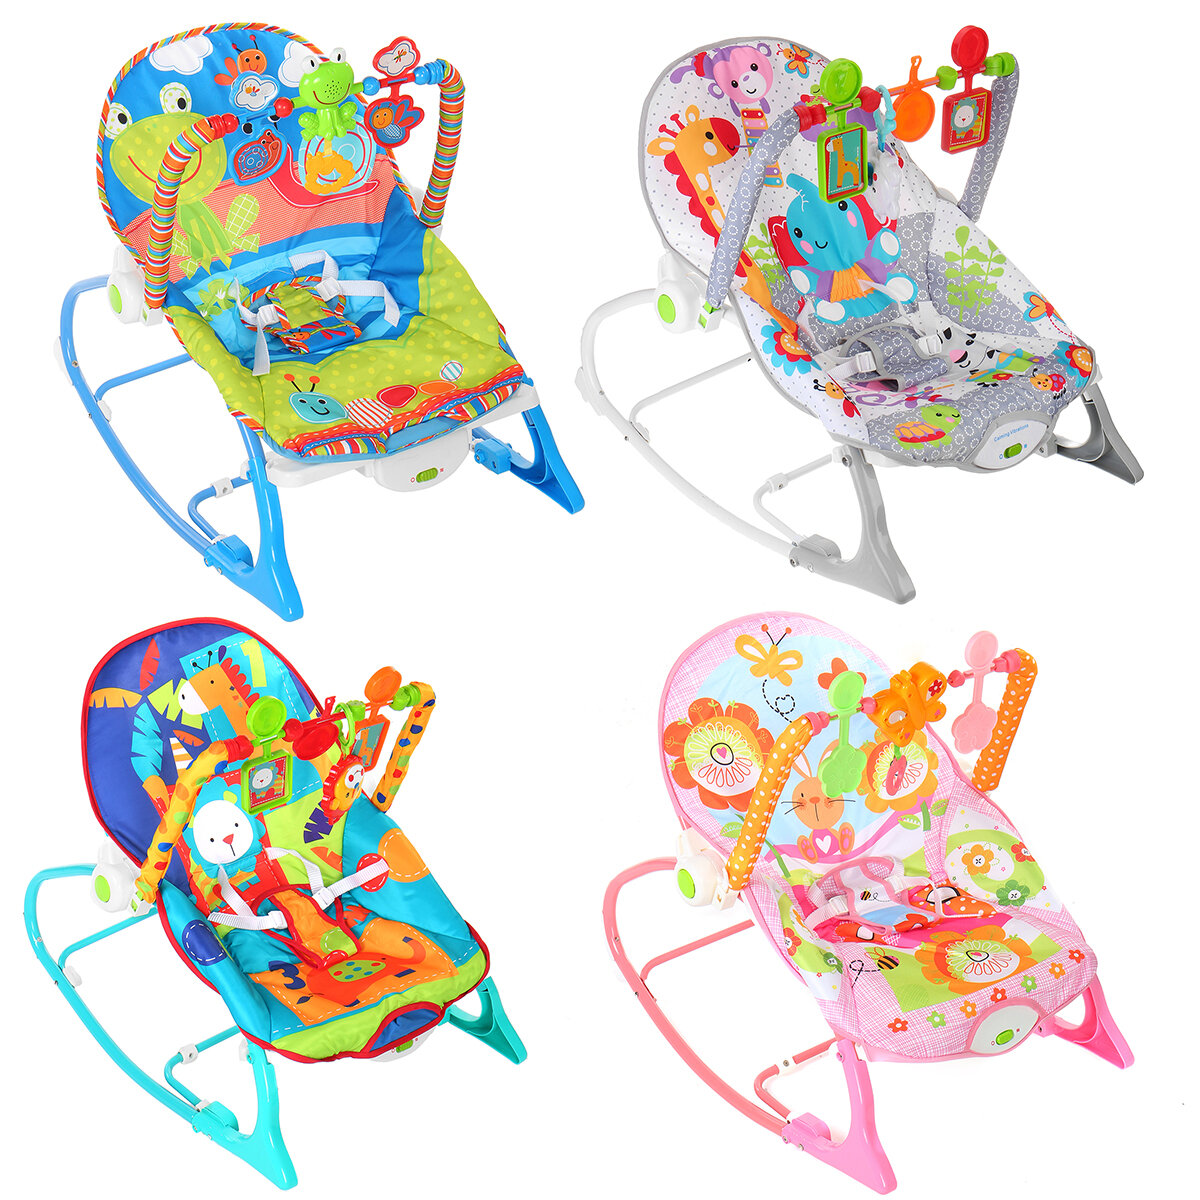 Multifunctional Lightweight Baby Cradling Chair Music Vibration Infant-to-Toddler Rocking Chair